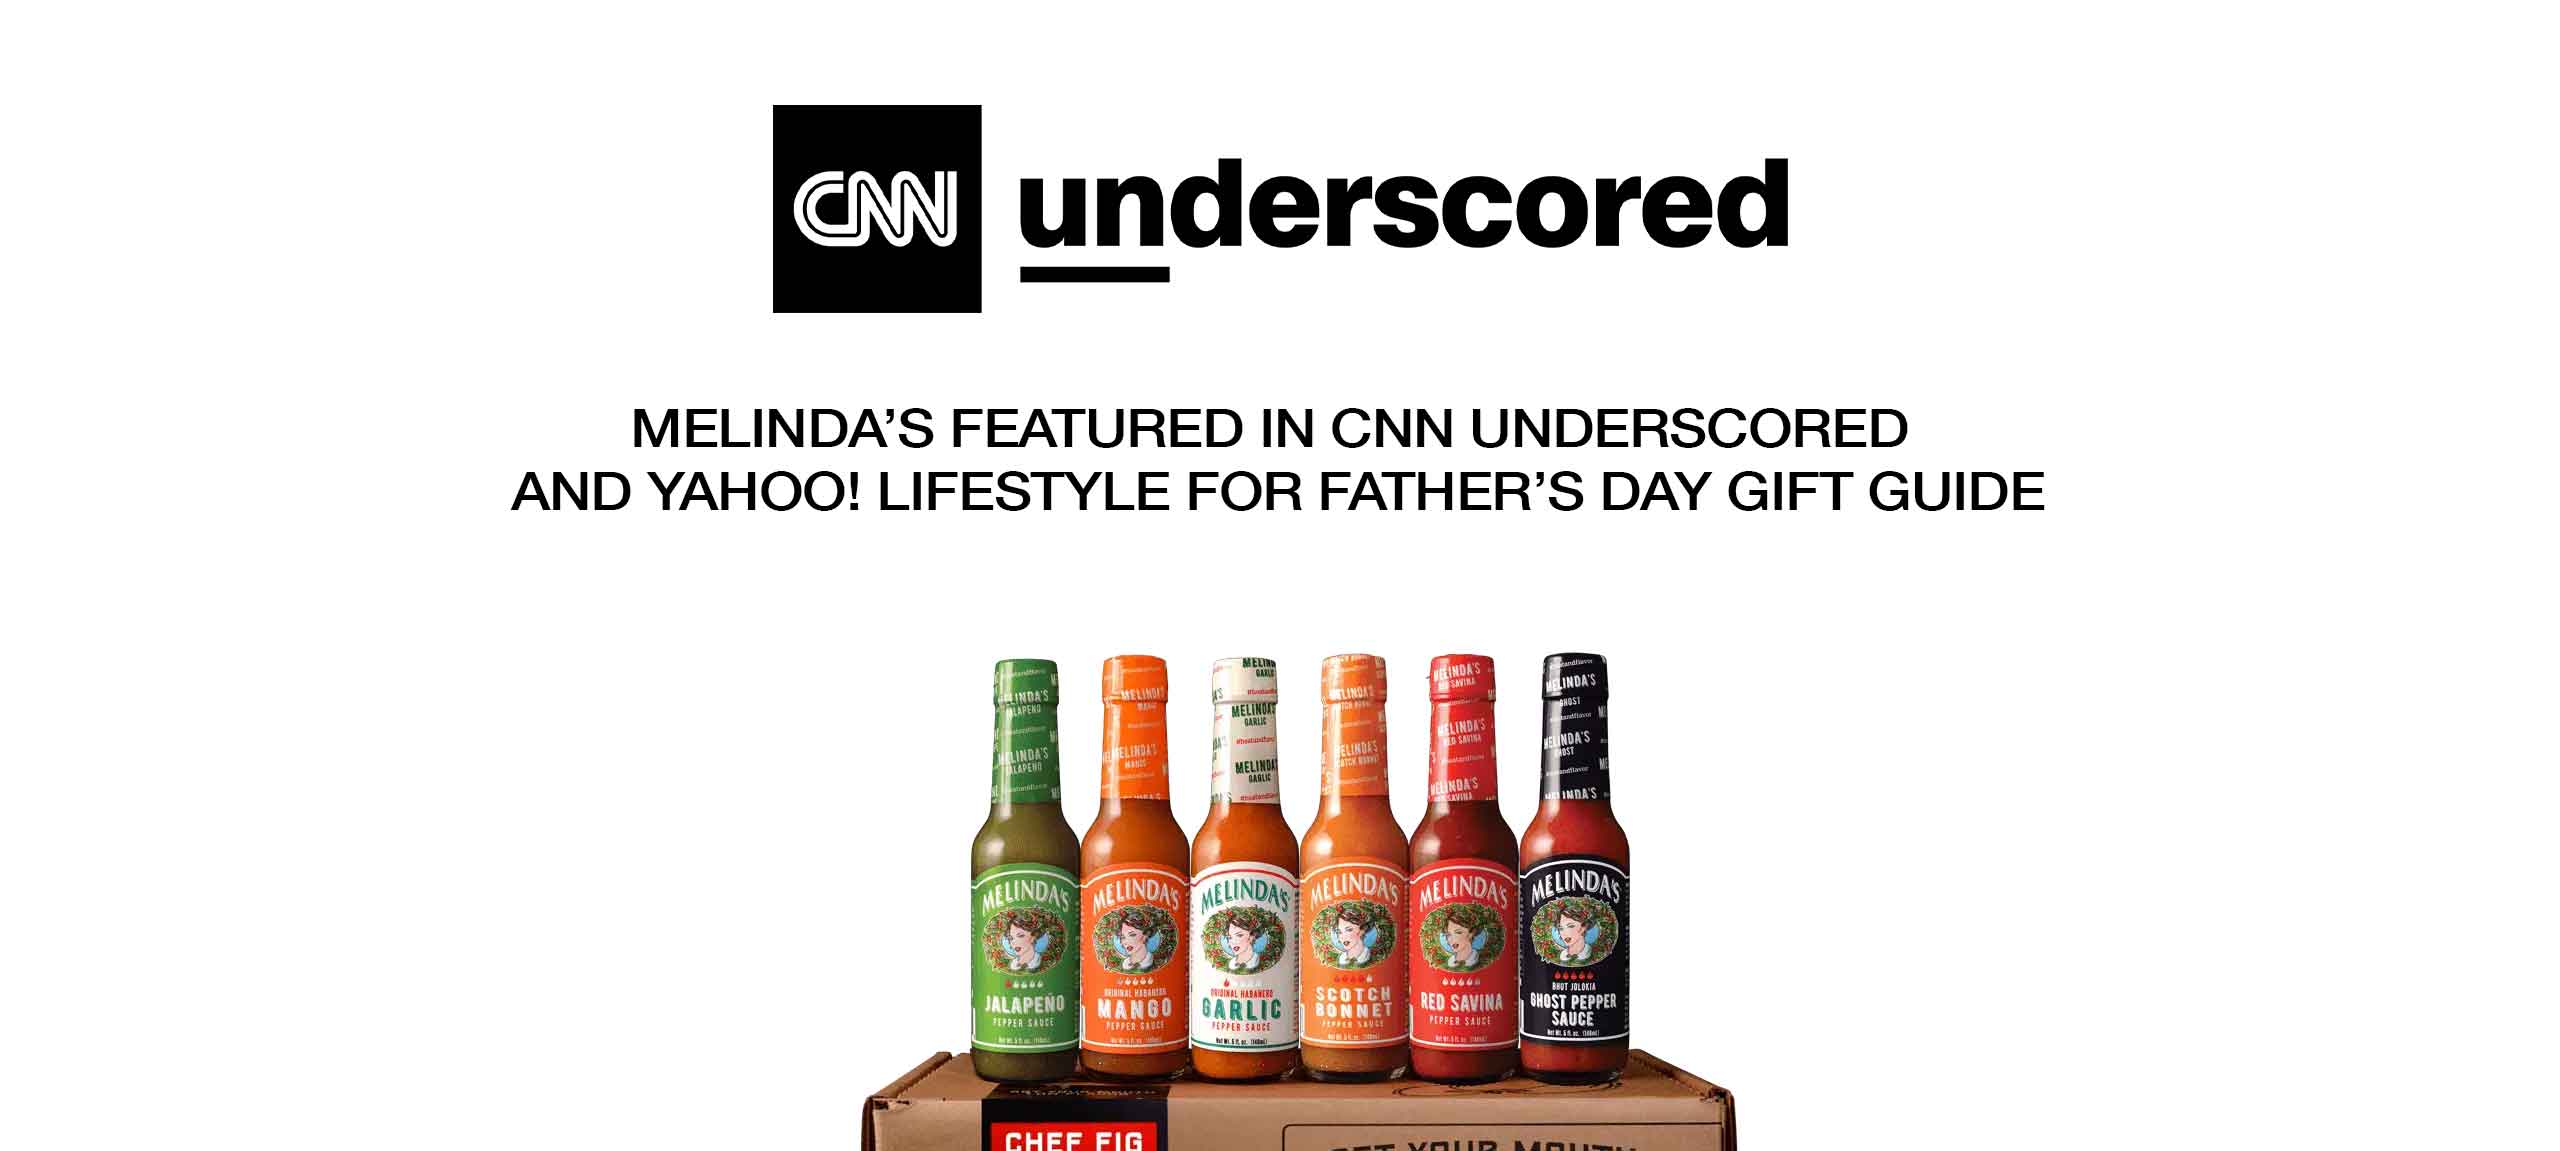 Melinda’s Featured in CNN Underscored and Yahoo! Lifestyle for Father’s Day Gift Guide